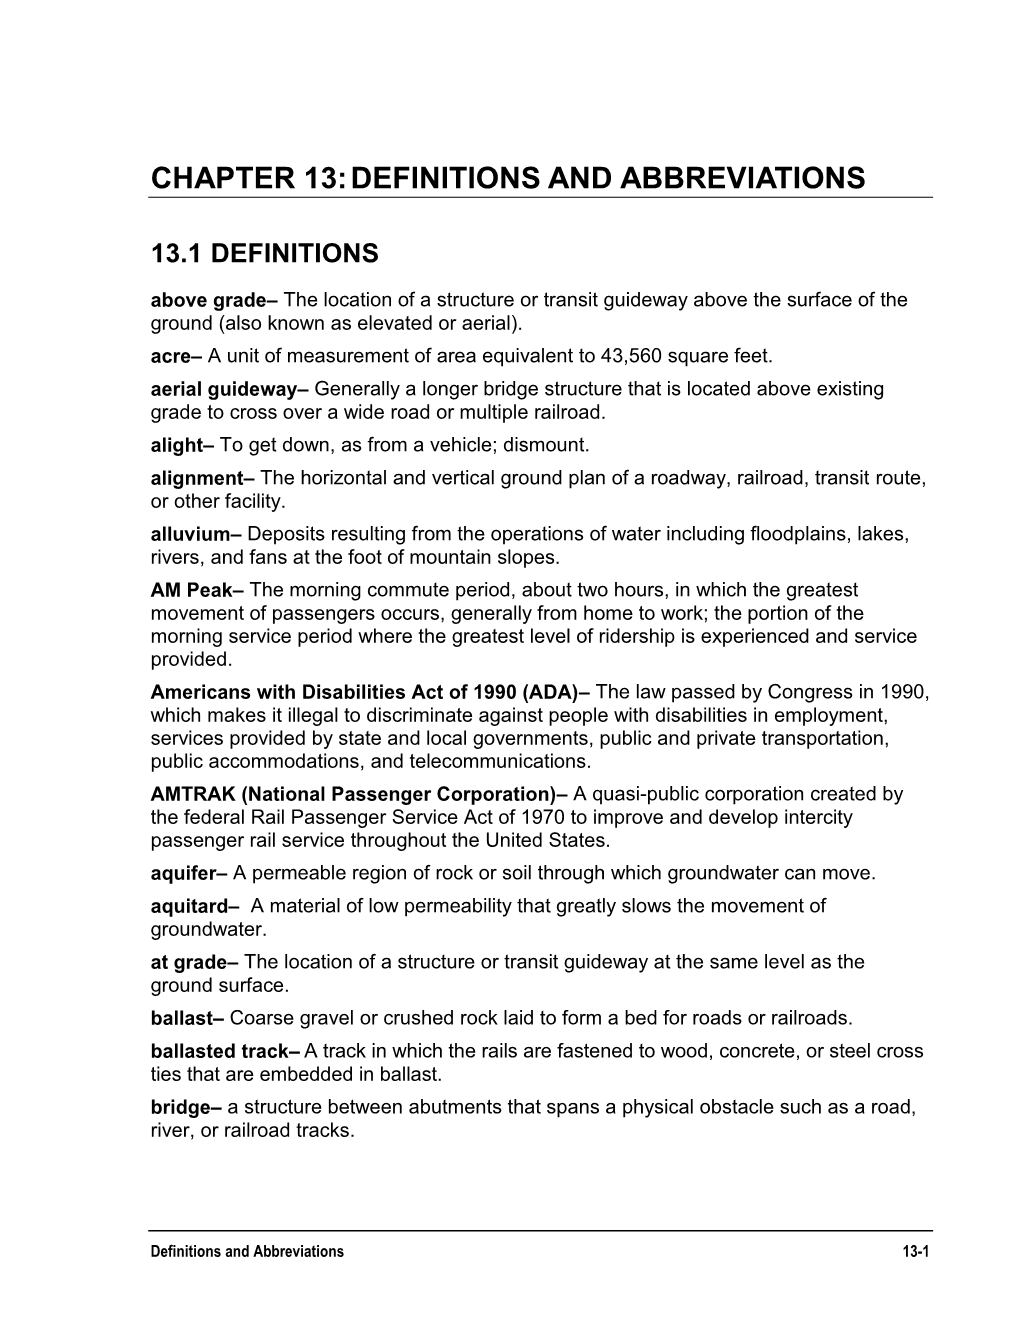 Definitions and Abbreviations